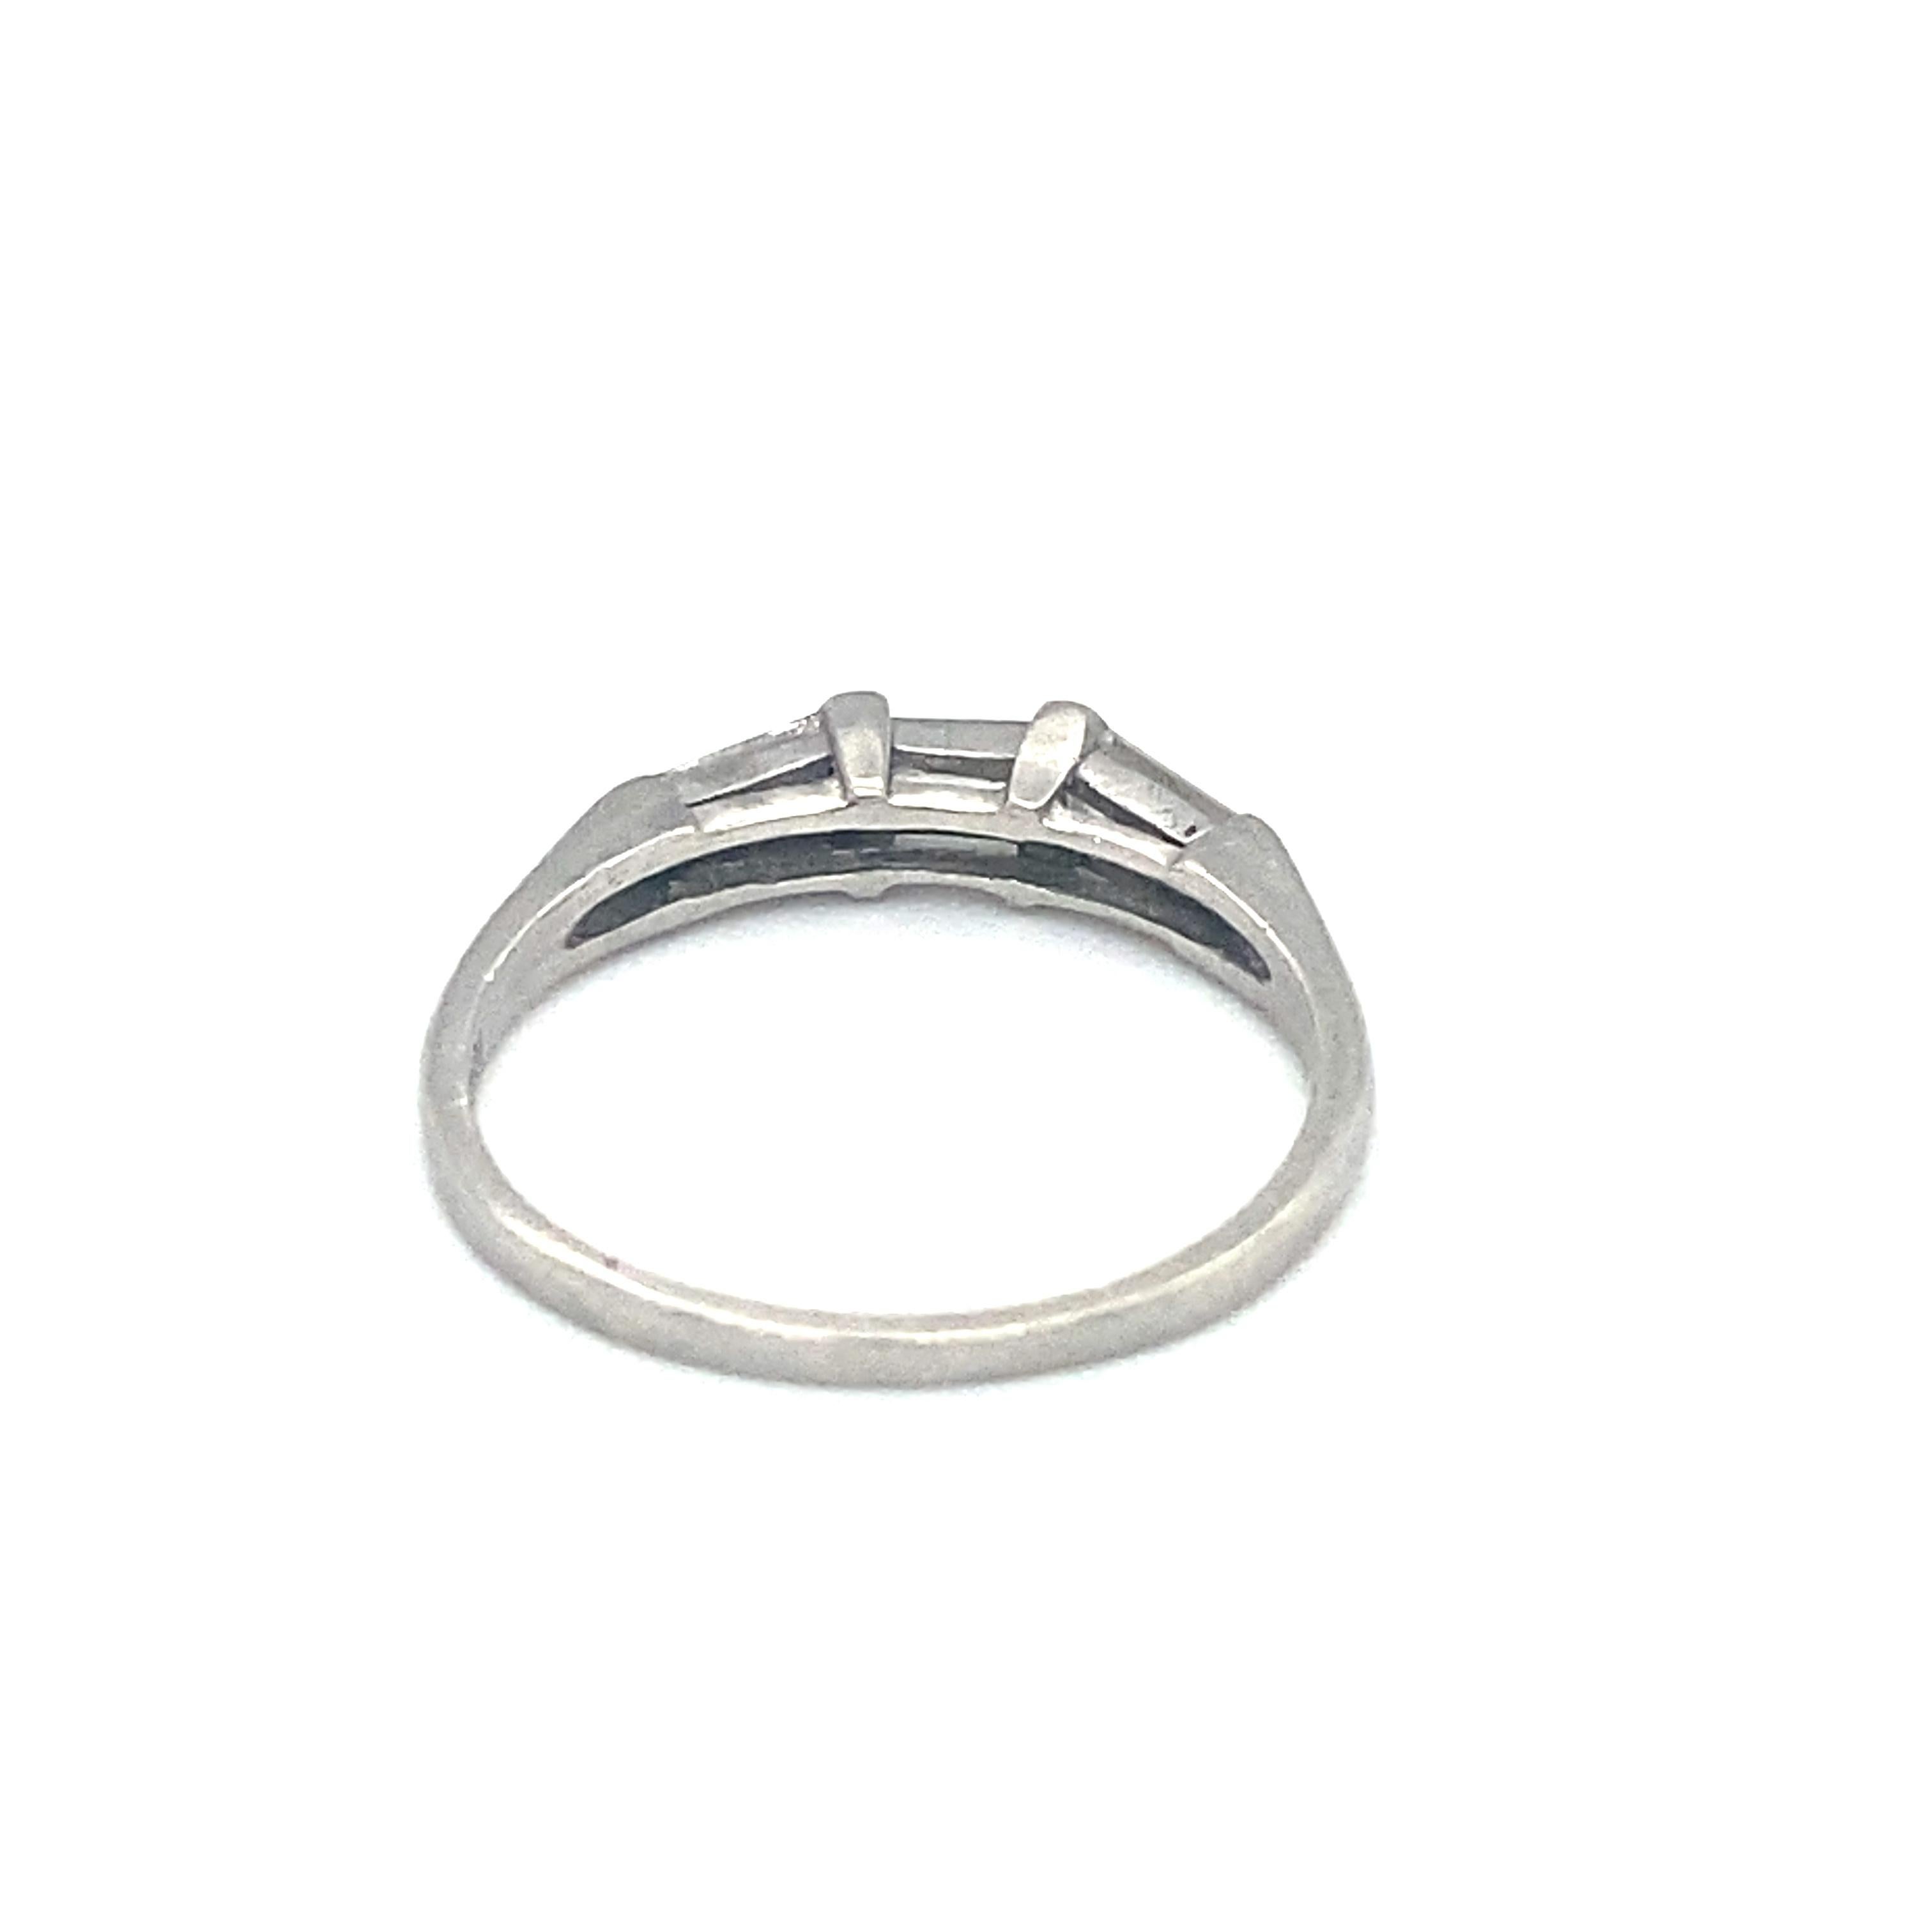 Item Details: This vintage ring has three baguette diamonds and makes a great companion to your engagement ring!

Circa: 1950s
Metal Type: Platinum
Weight: 2.6g
Size: US 6.25